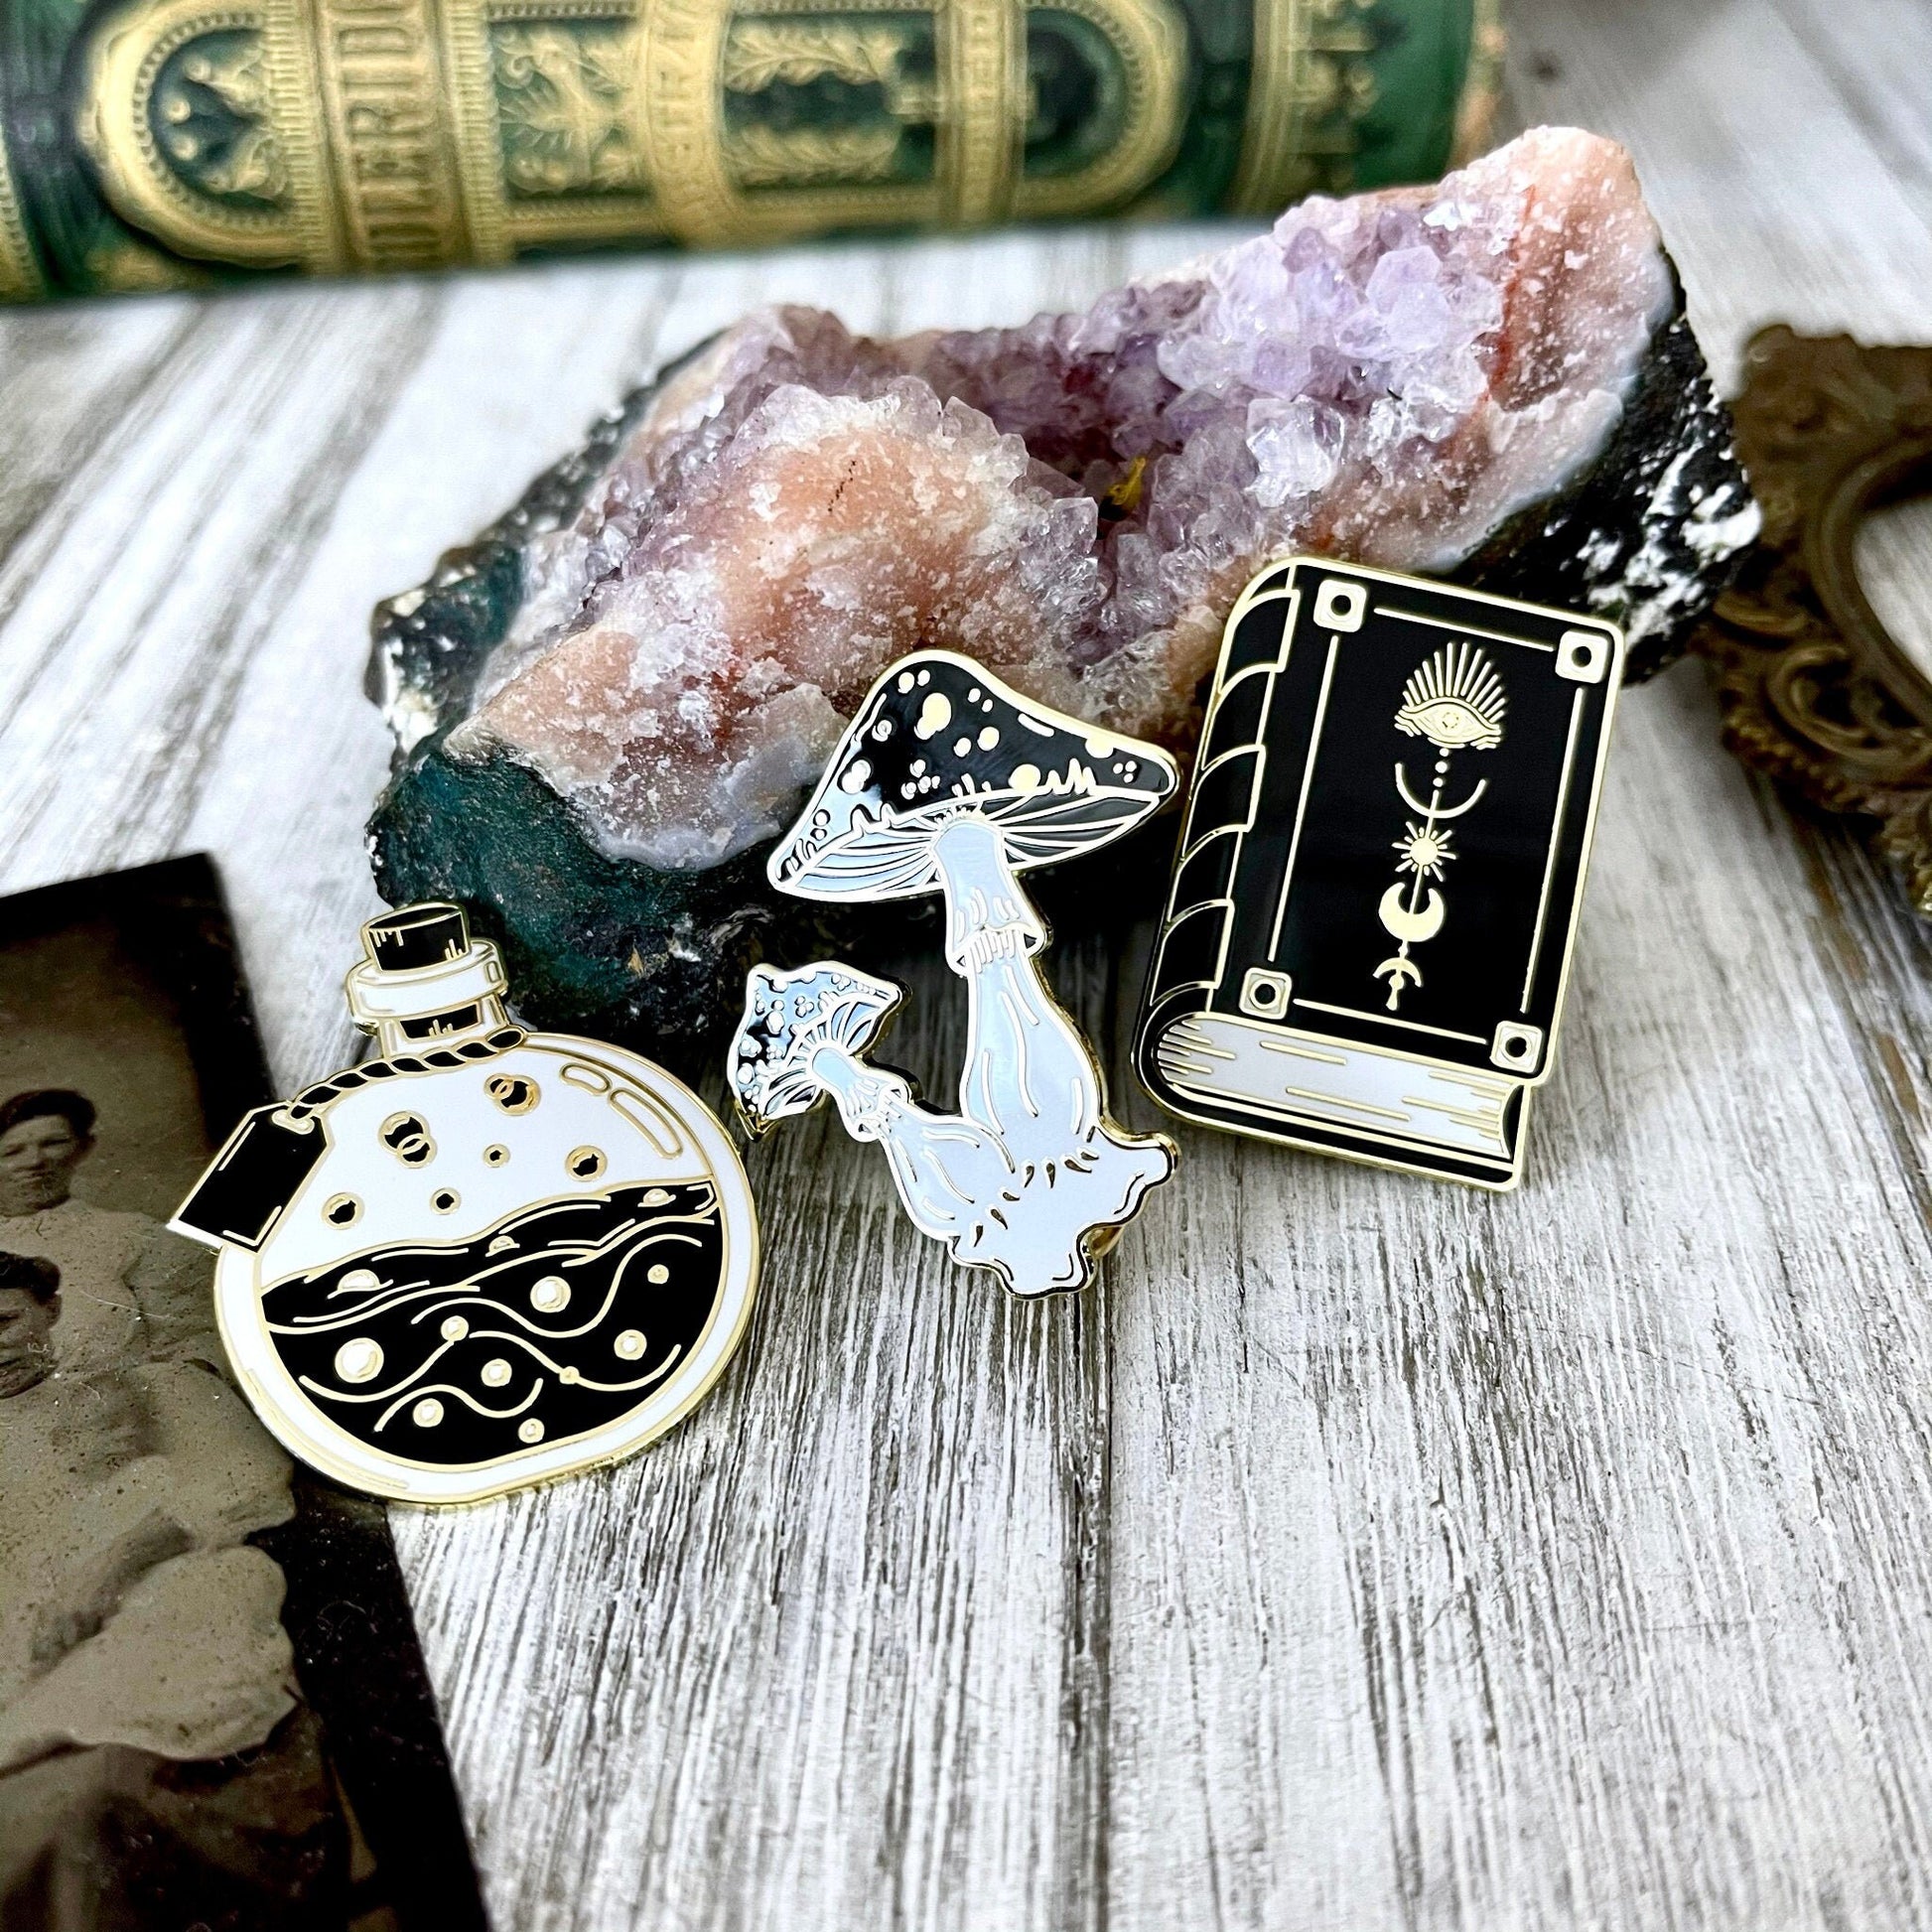 FOXLARK Witchy Pin Set - Set of 3 Witchy Enamel Pins- Mushroom Pin, Potion Bottle Pin, Witch Pin , Book Pin